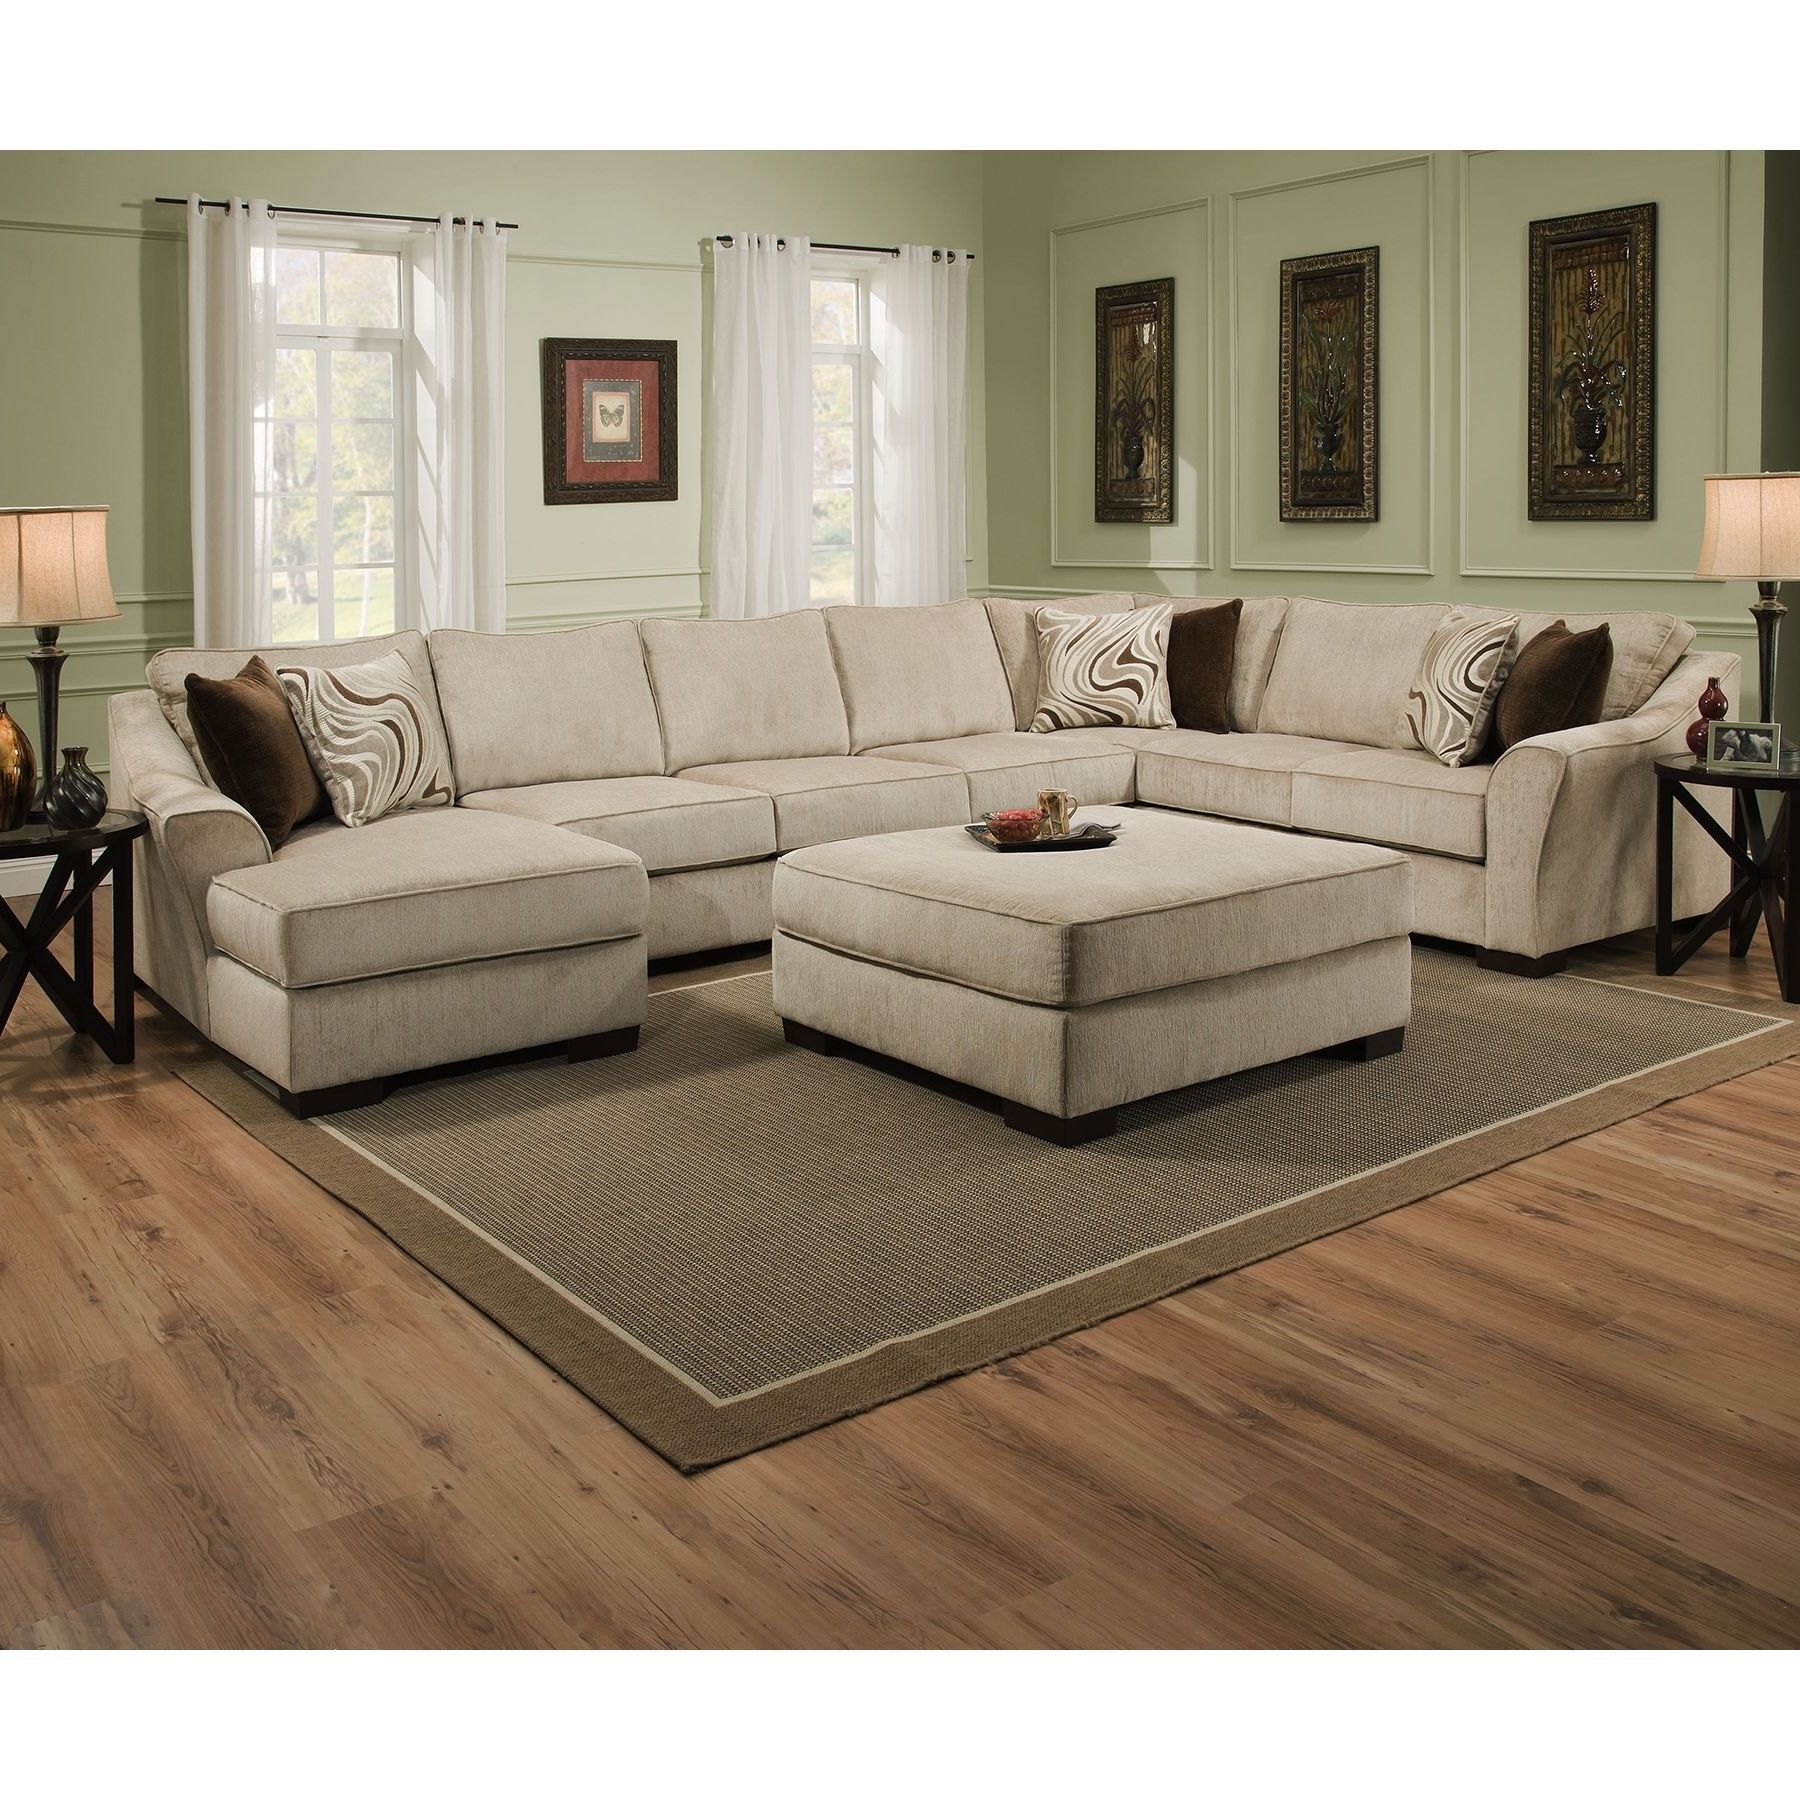 Halifax Sectional Sofas Pertaining To Fashionable Furniture : Corner Sofa Kuwait Sectional Couch El Paso Sectional (View 13 of 15)